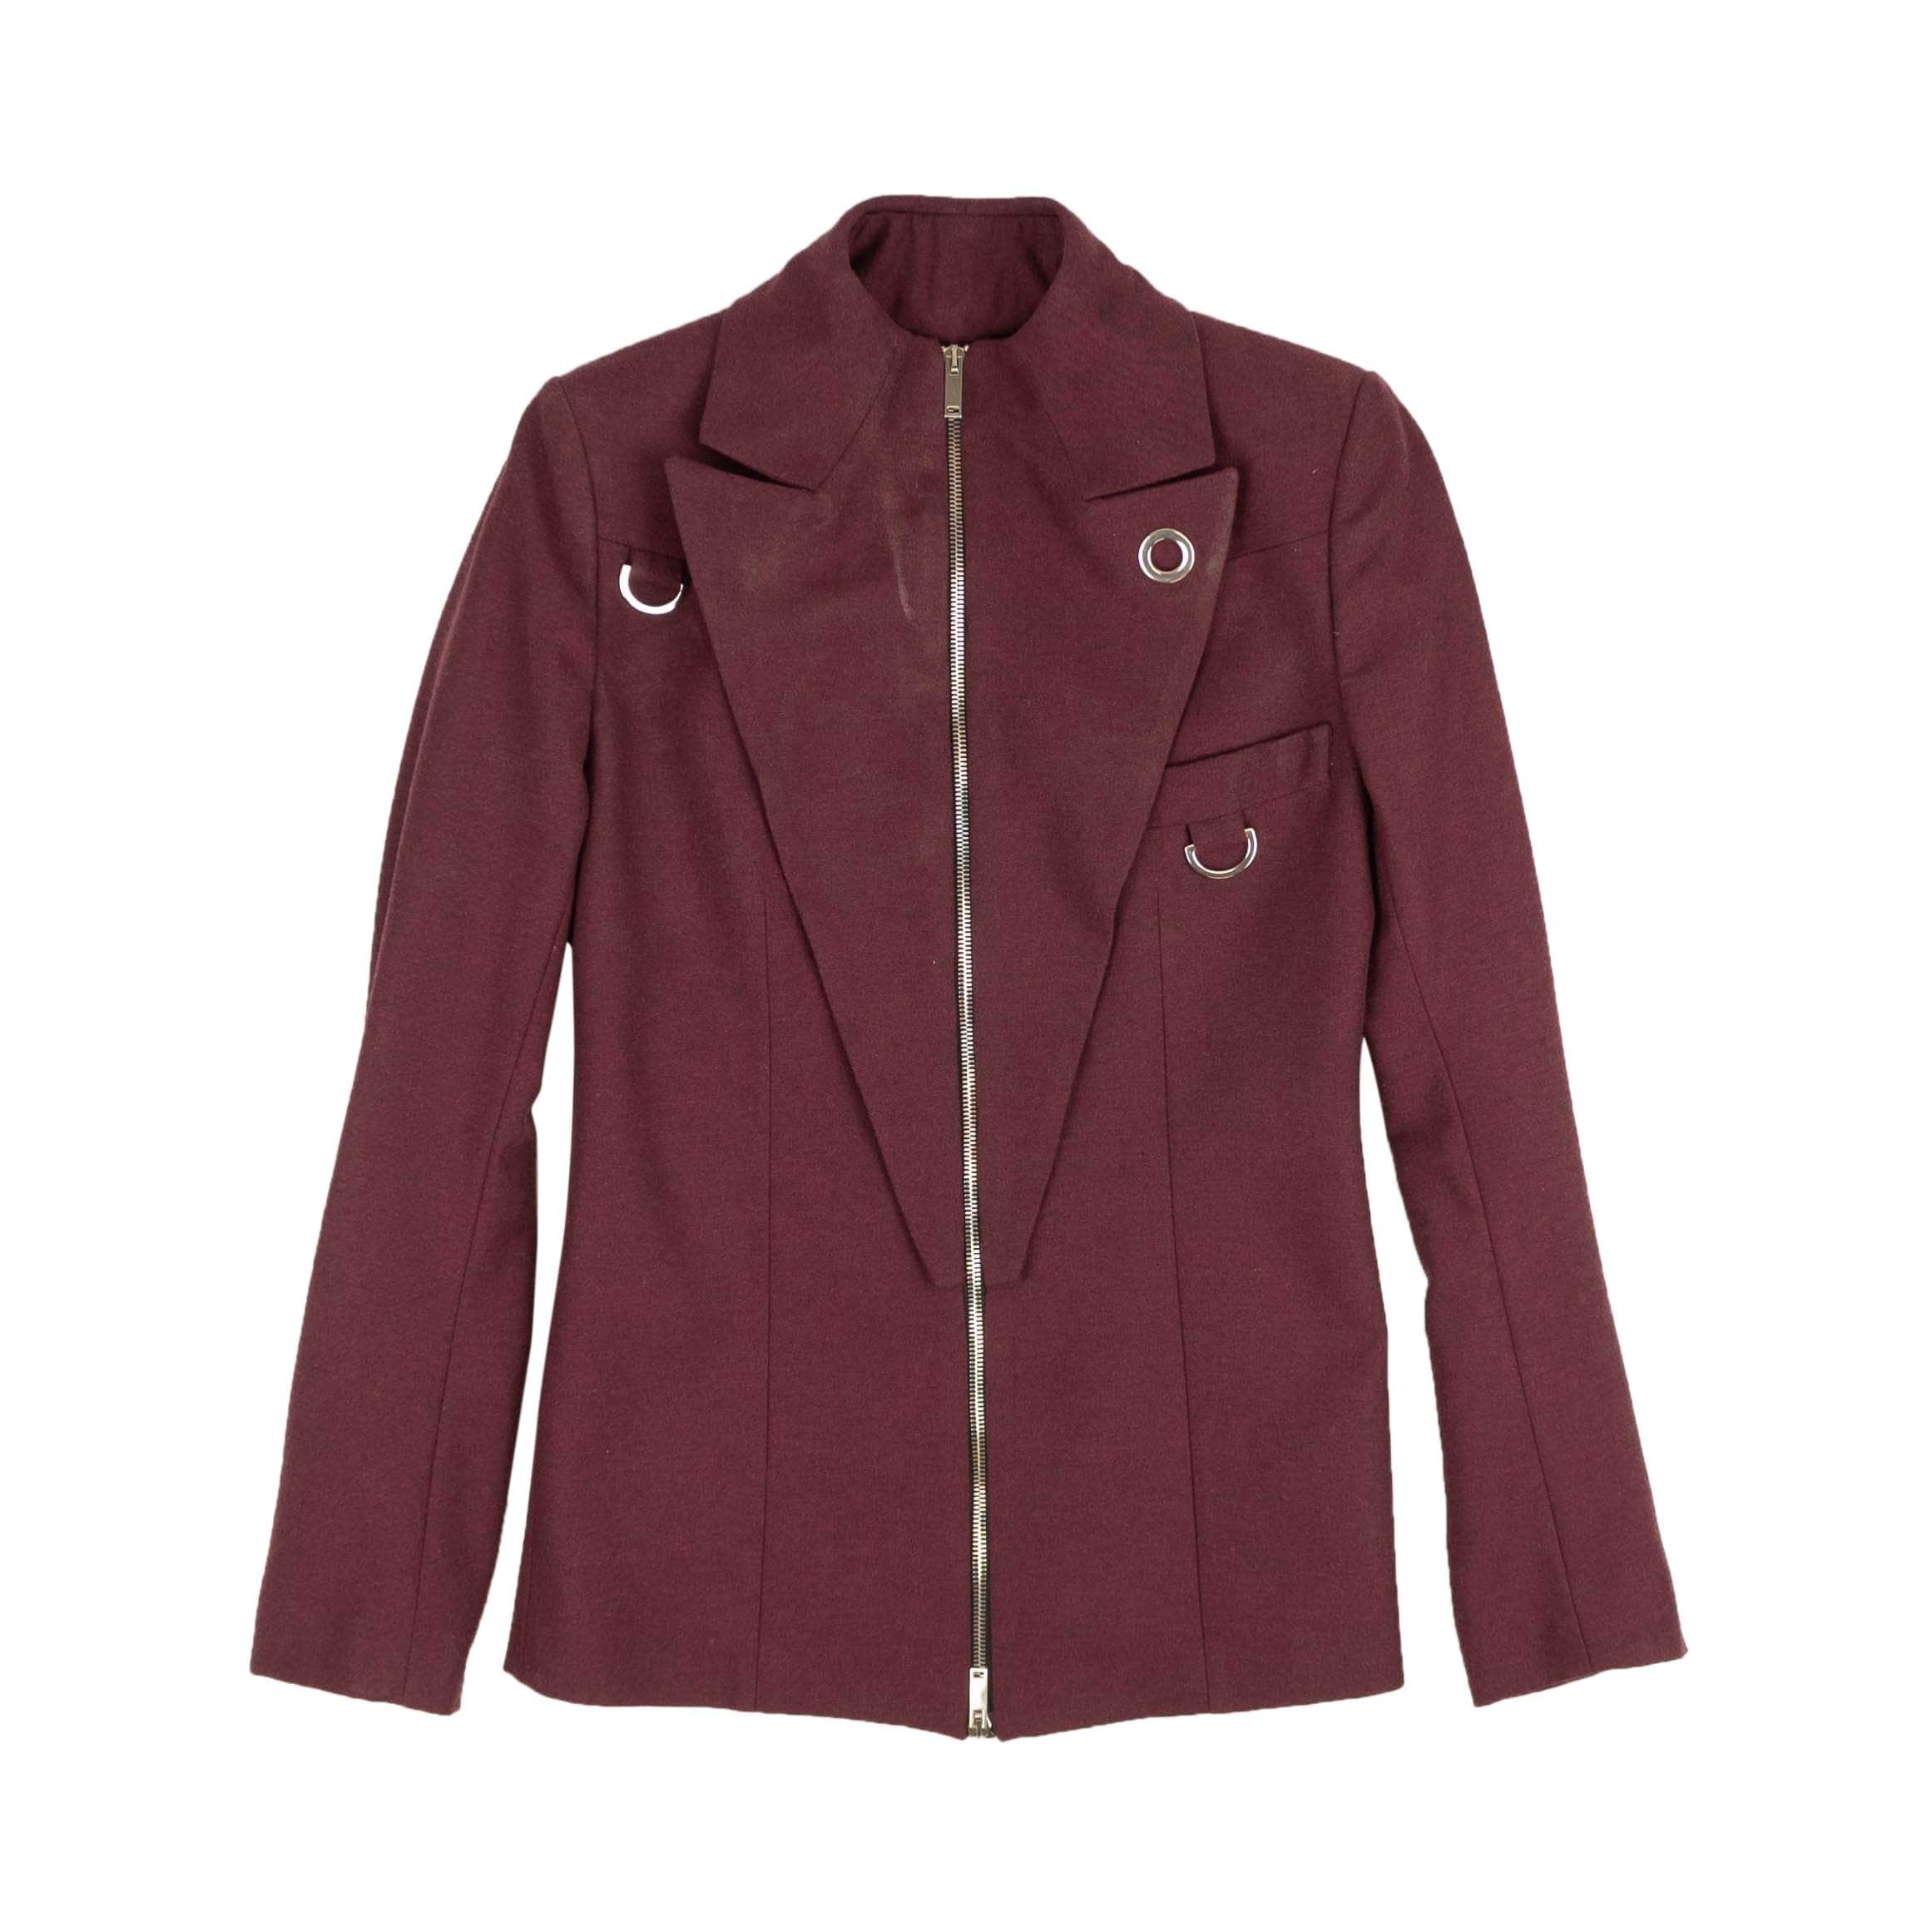 Palm Angels 750-1000, channelenable-all, chicmi, couponcollection, gender-womens, main-clothing, palm-angels, size-40, womens-jackets-blazers 40 Red Zip-Up Blazer 82NGG-PA-31/40 82NGG-PA-31/40